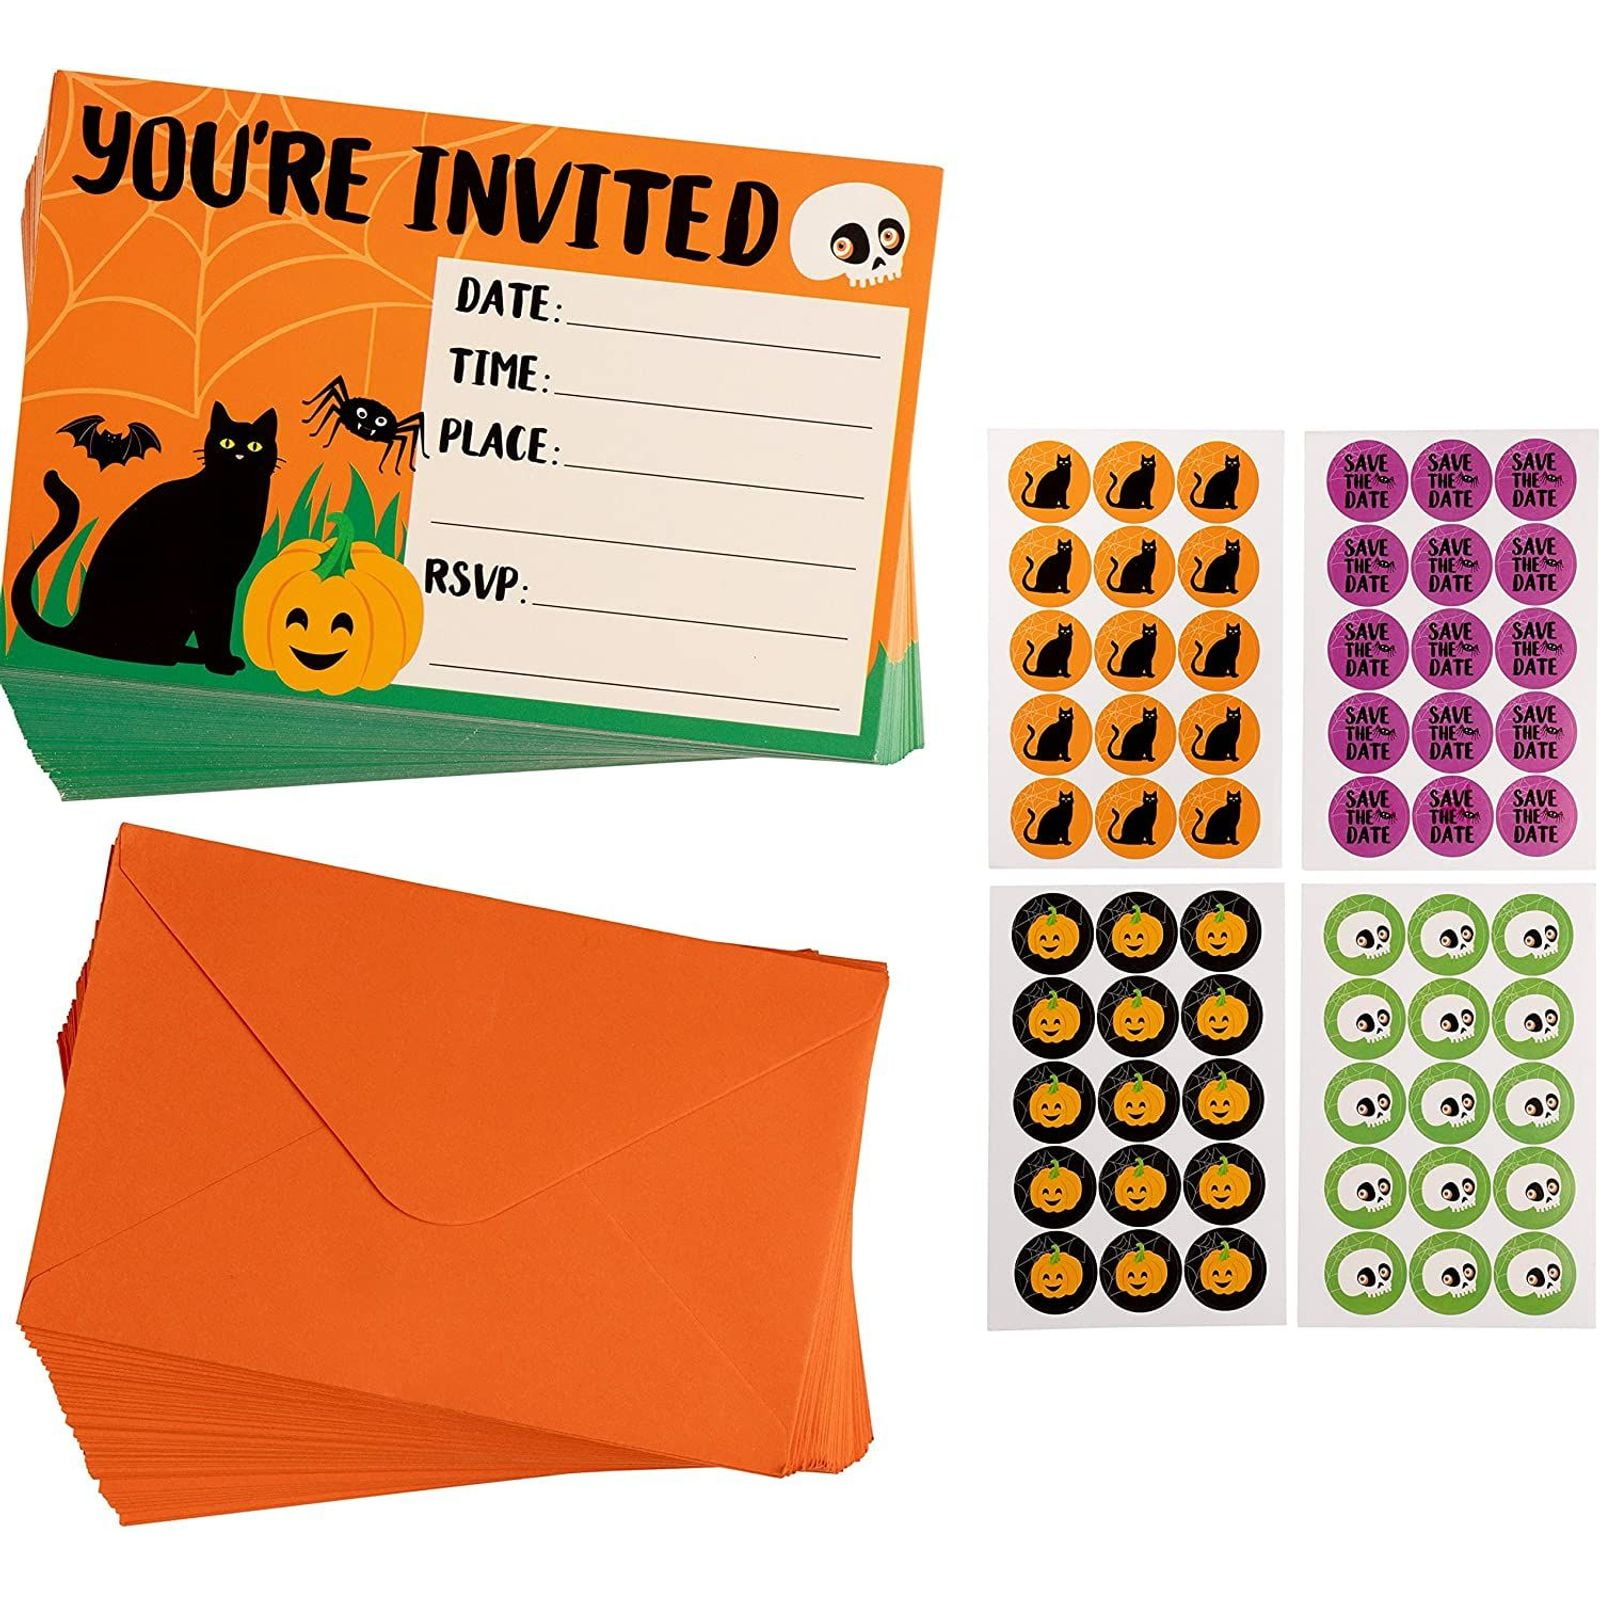 12pack birthday Dead pool  Party Invitations with matching envelopes 